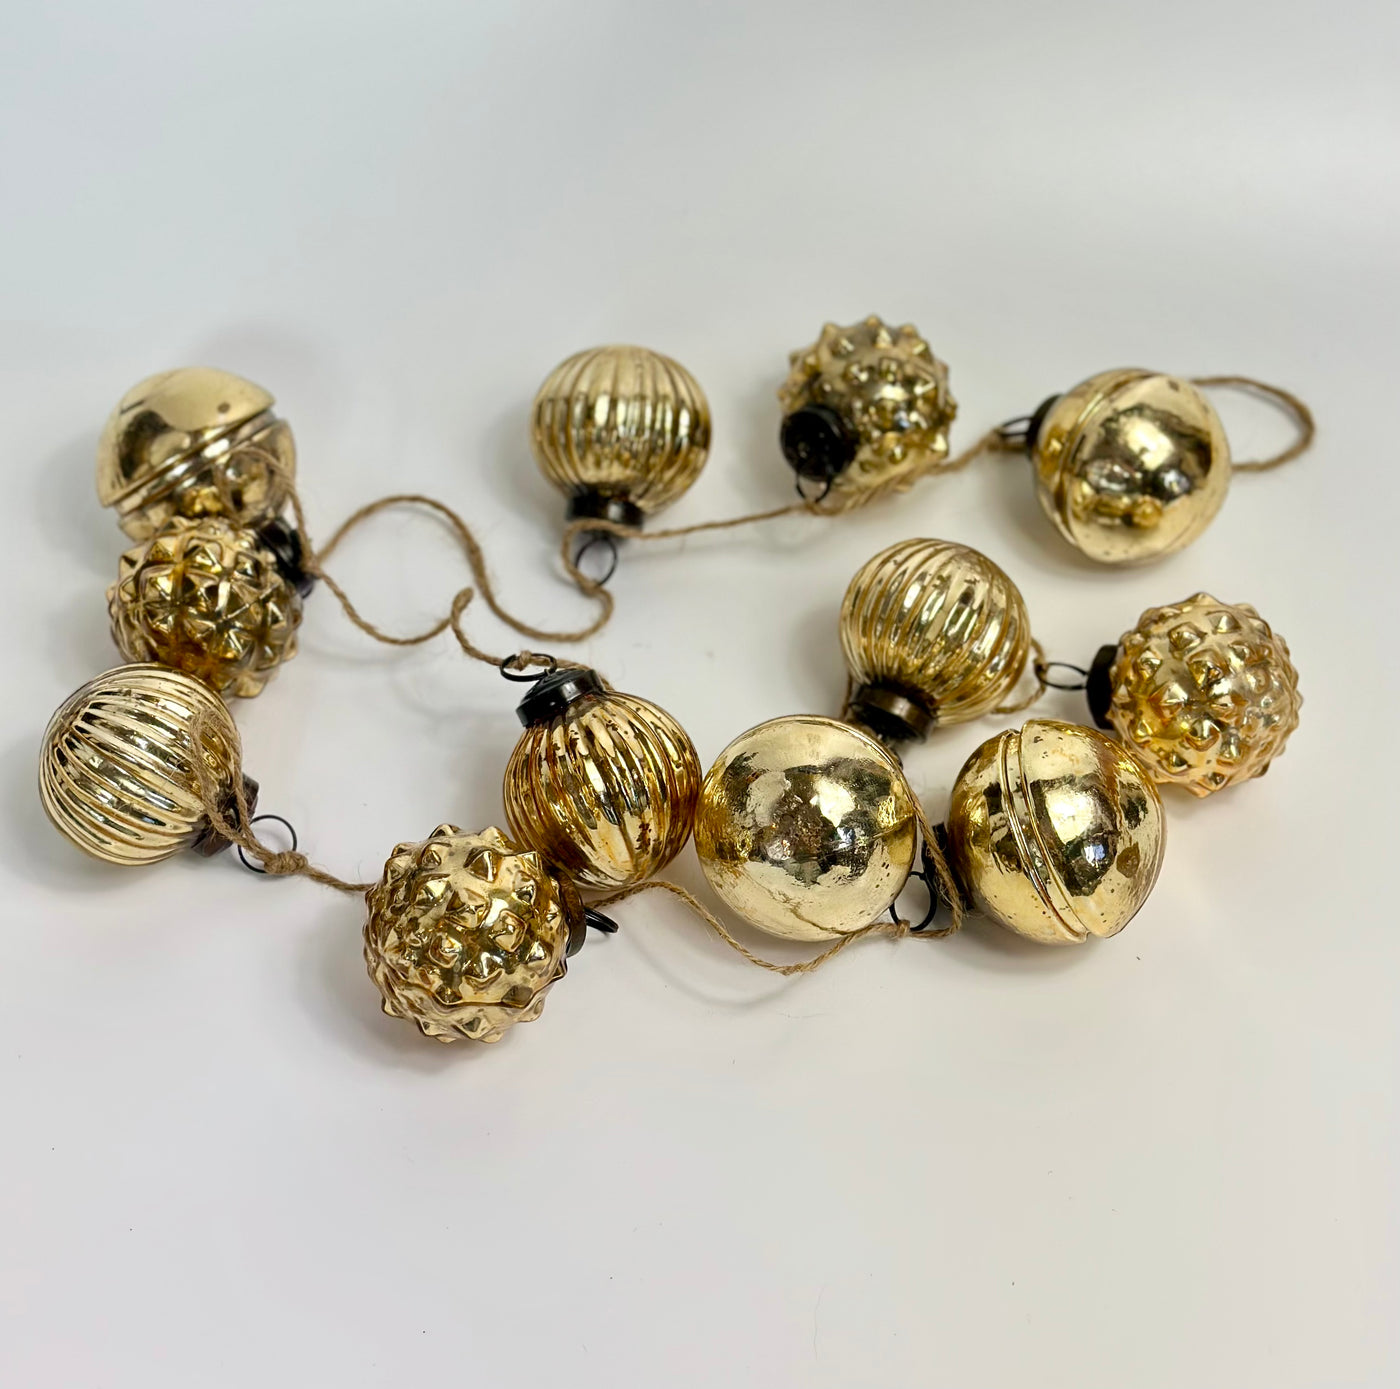 Christmas chain made of gold ornaments